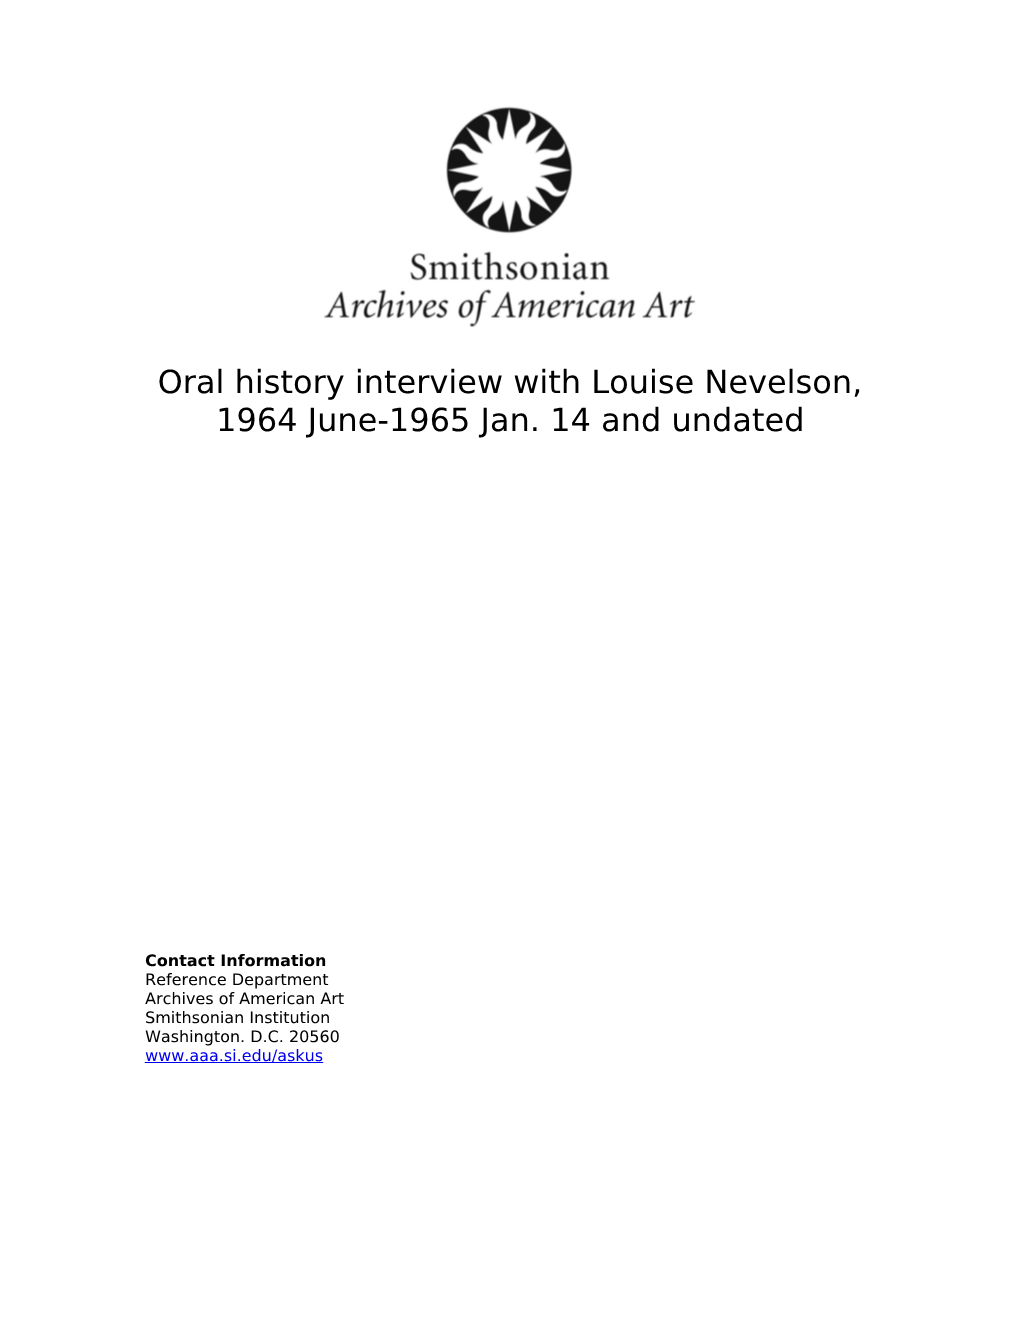 Oral History Interview with Louise Nevelson, 1964 June-1965 Jan. 14 and Undated